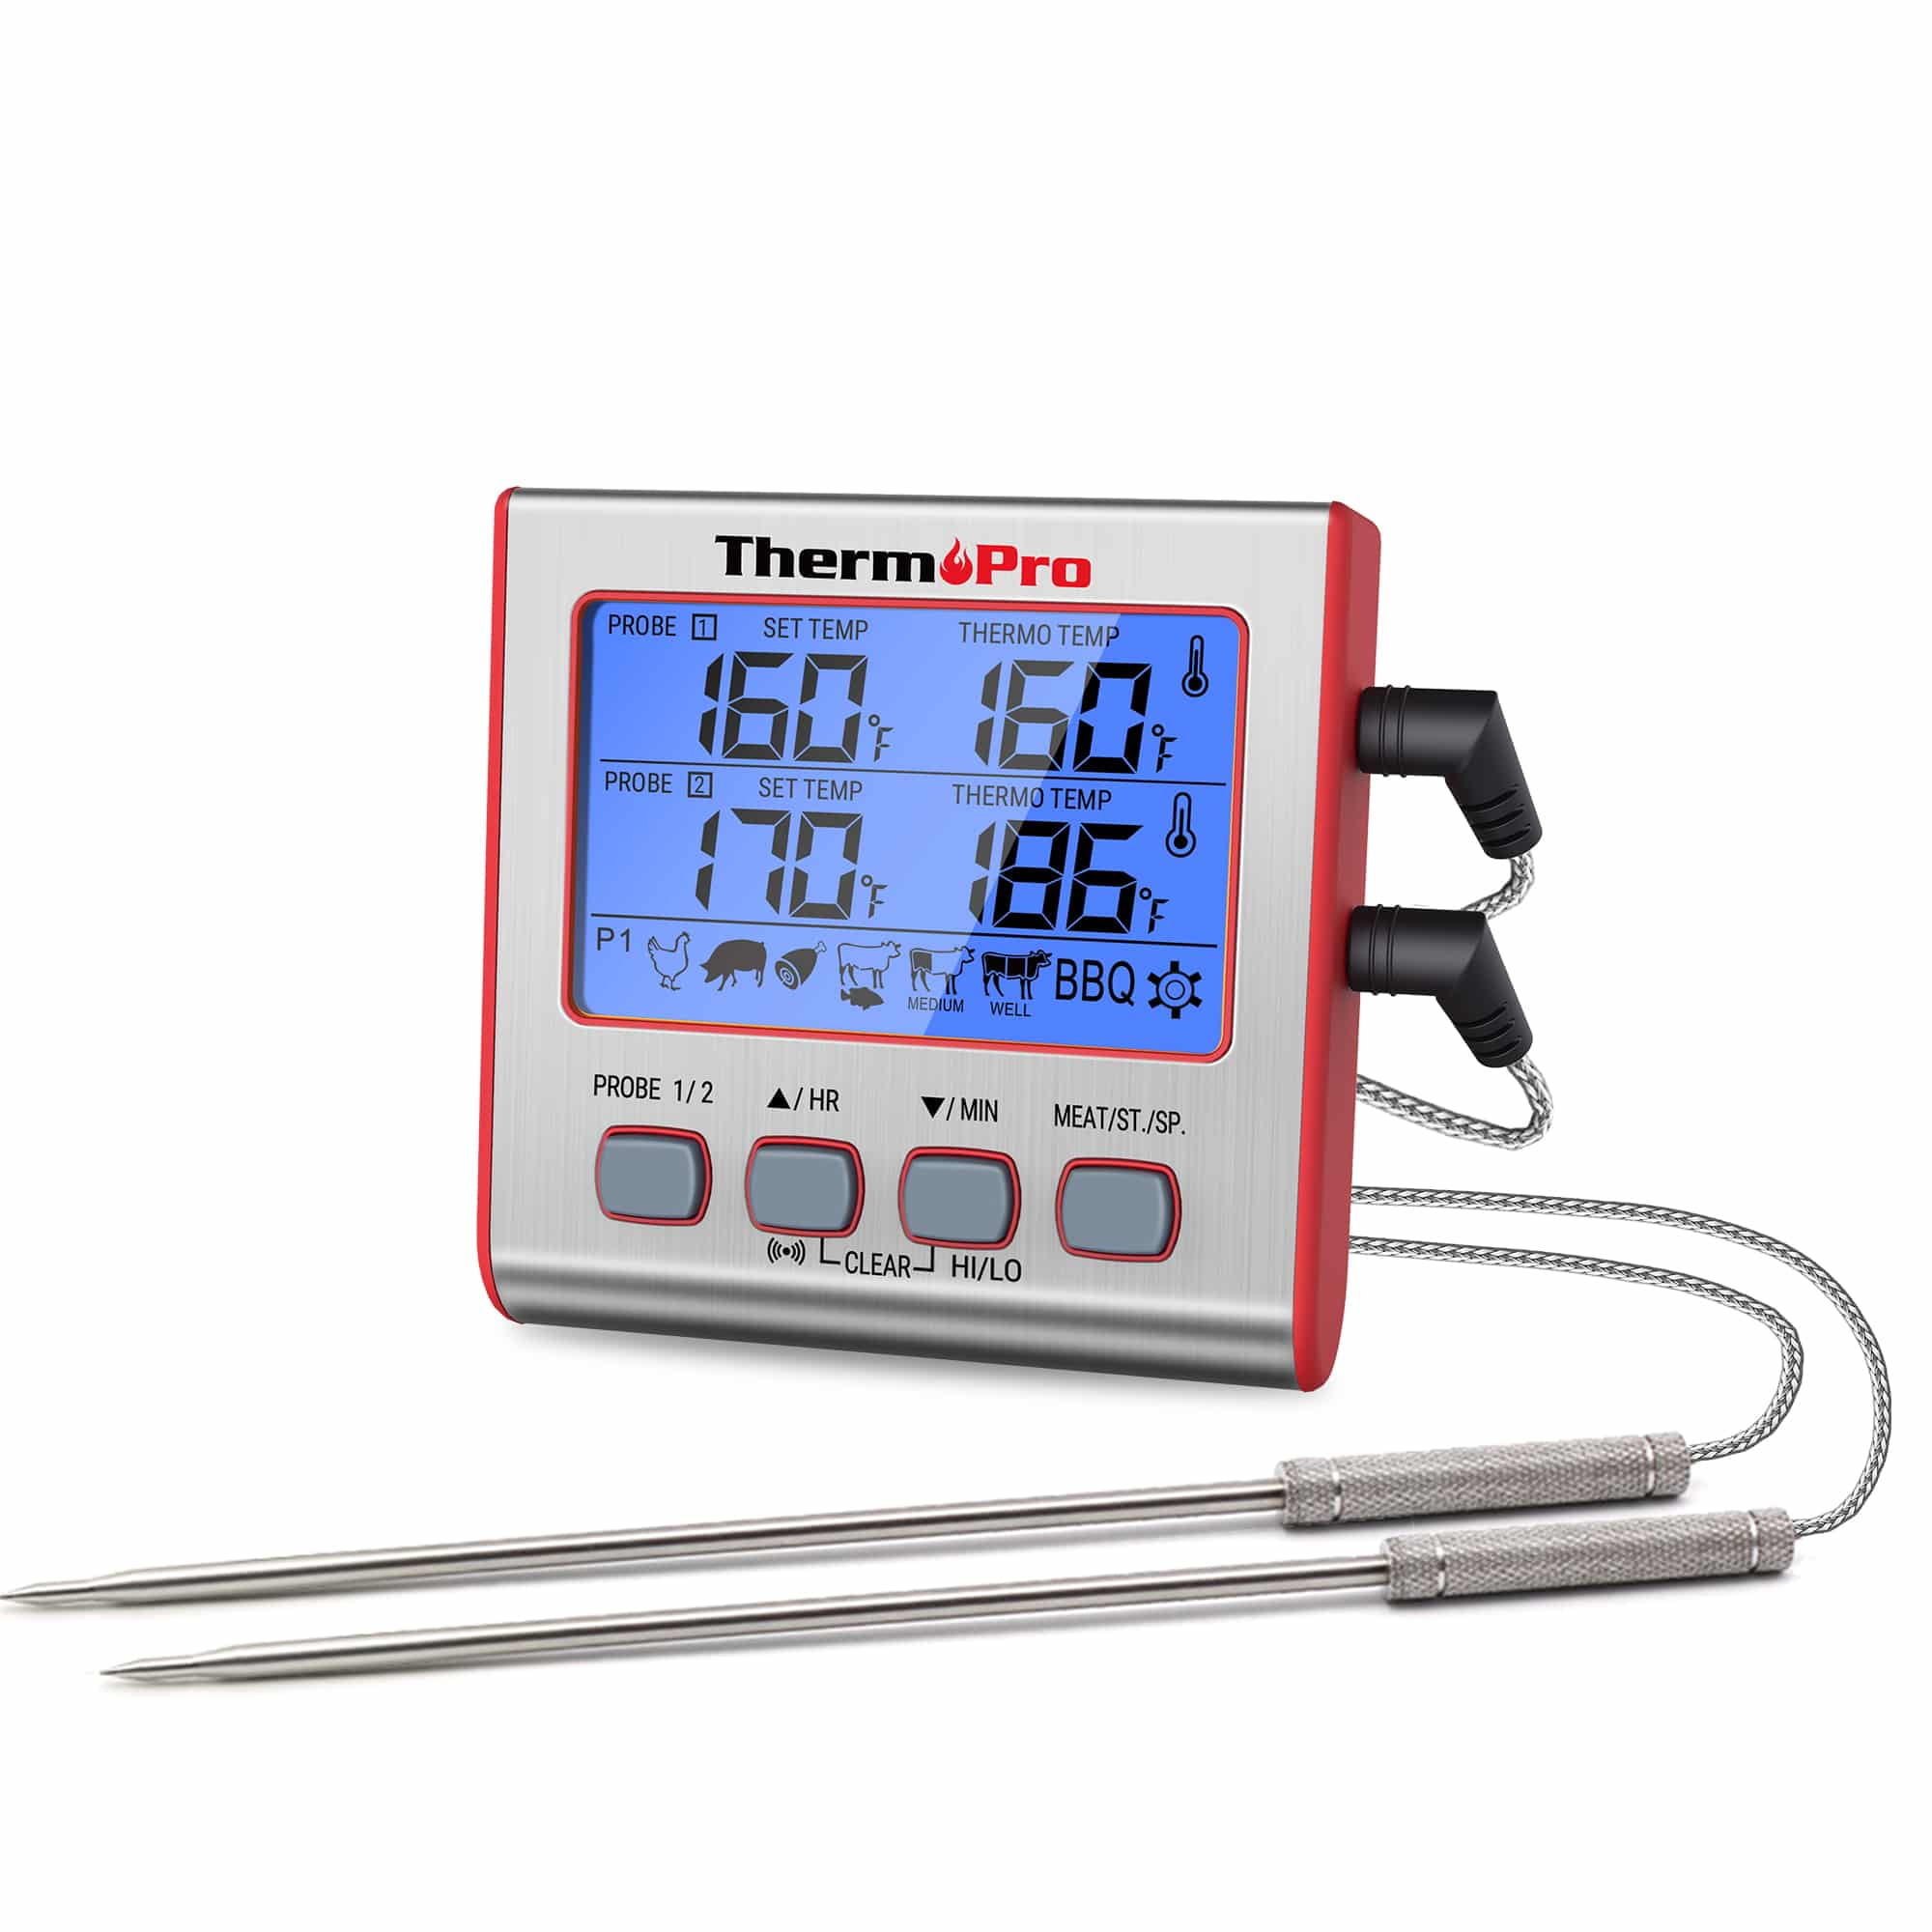 ThermoPro Digital Thermometer Meat Cooking & Timer Alarm for BBQ Food Oven Grill